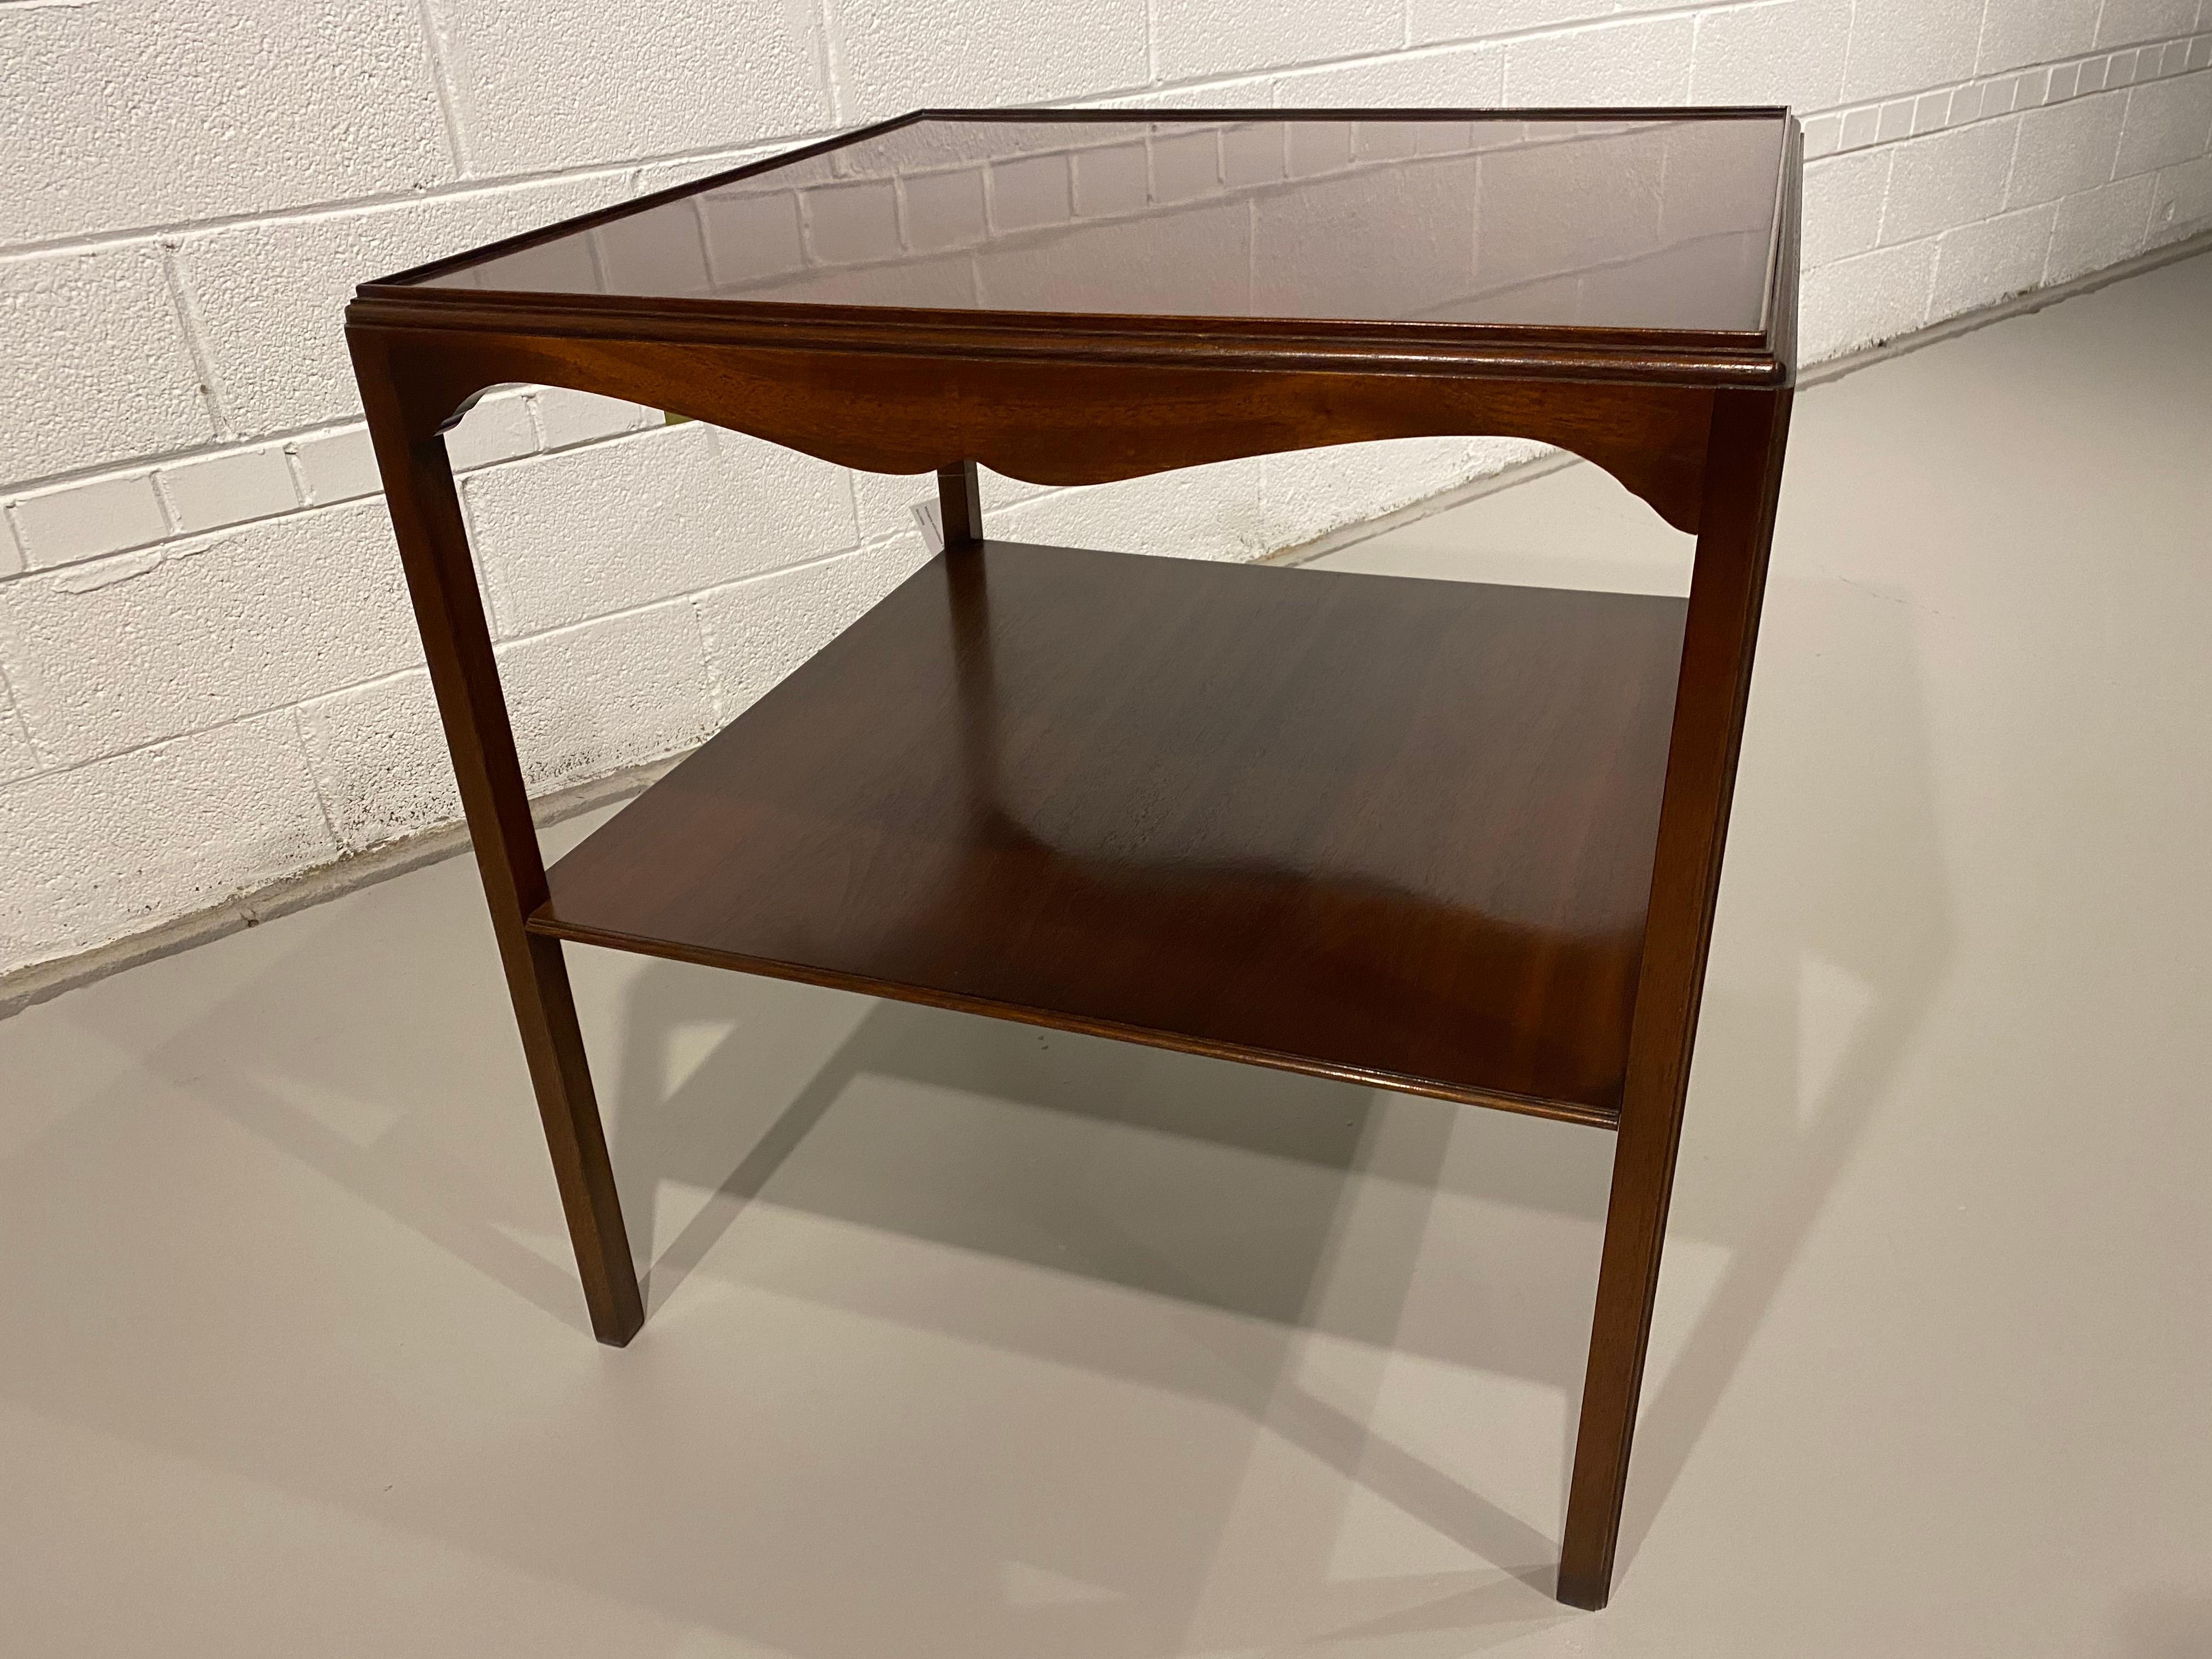 Georgian Style Side Table, Mahogany, English by Bevan Funnel, Two Tiers In Good Condition For Sale In Toronto, CA